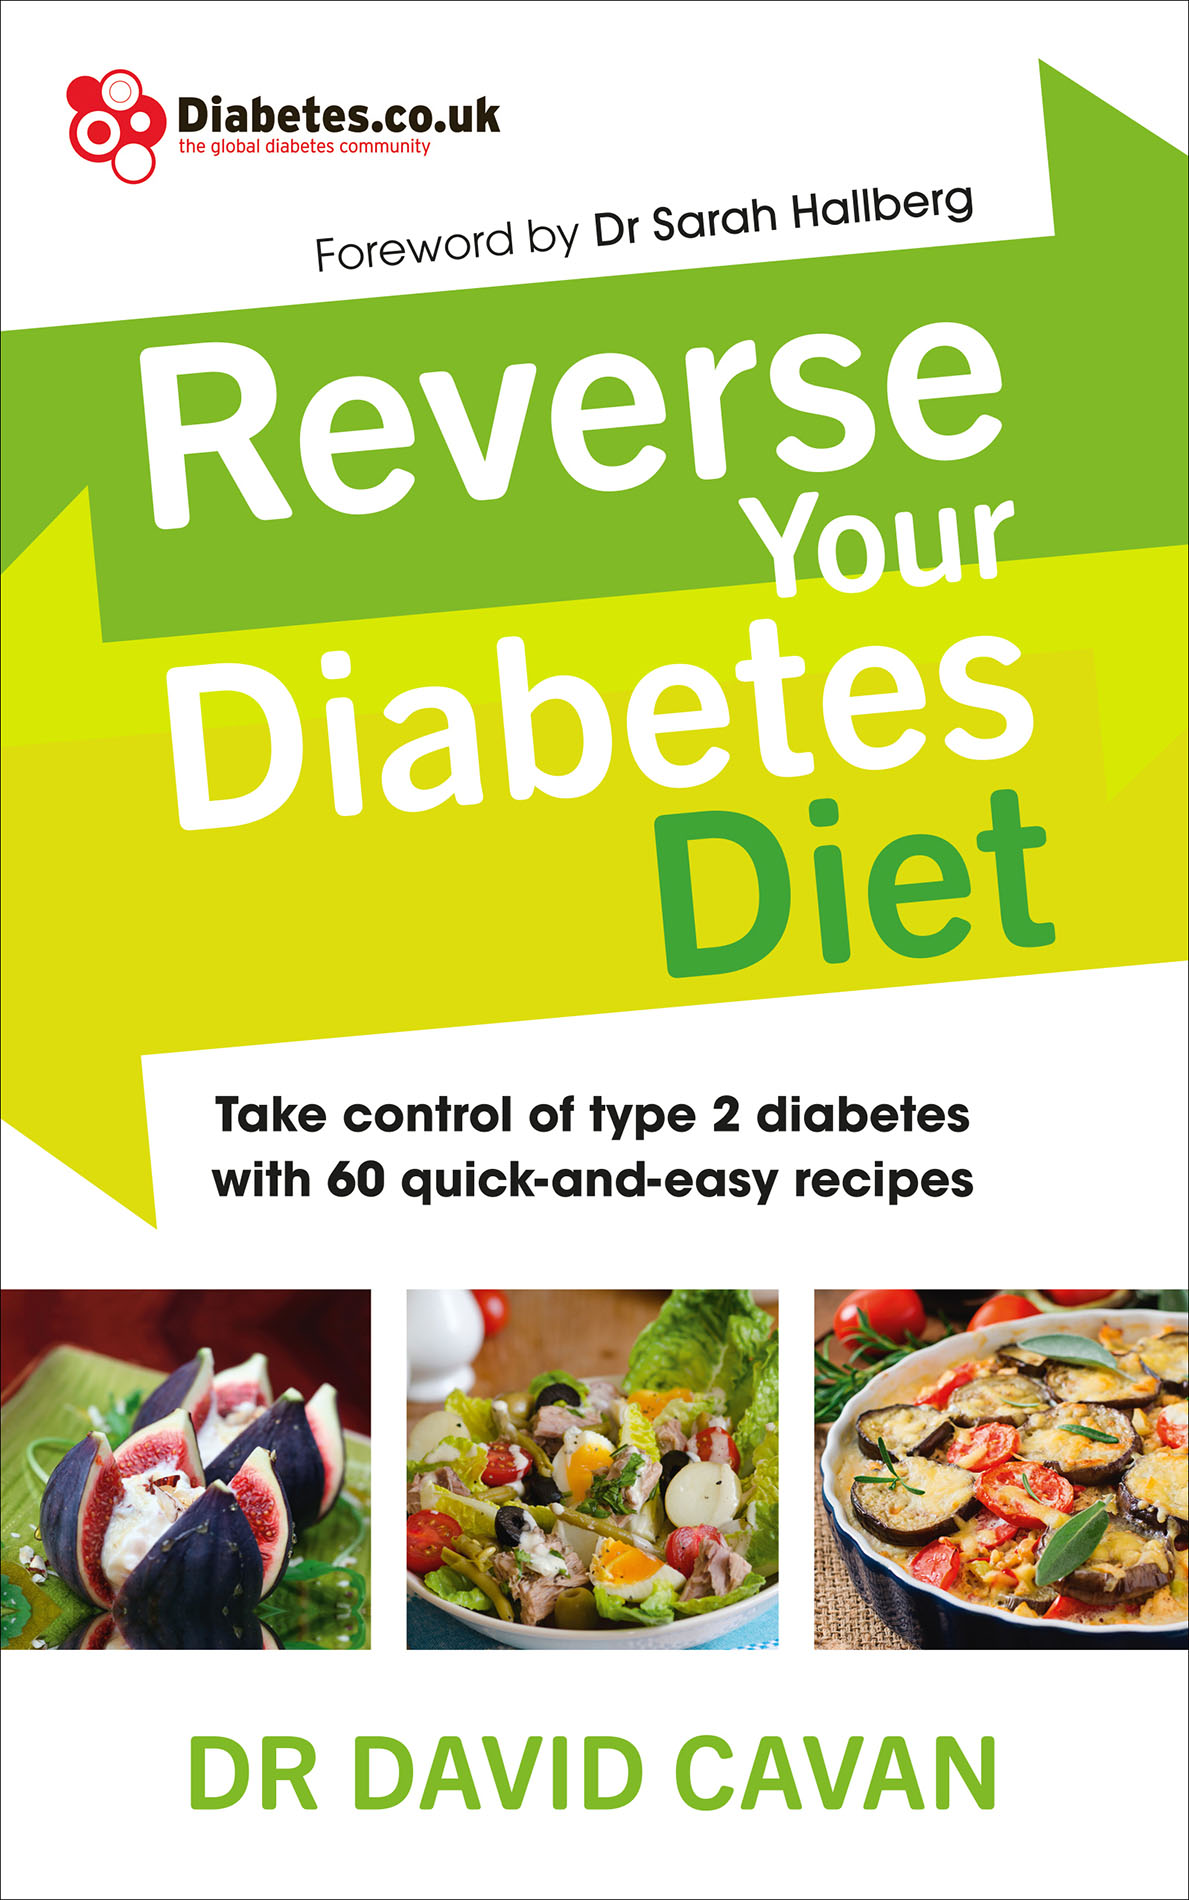 CONTENTS From the reviews of Reverse Your Diabetes by Dr David Cavan - photo 1